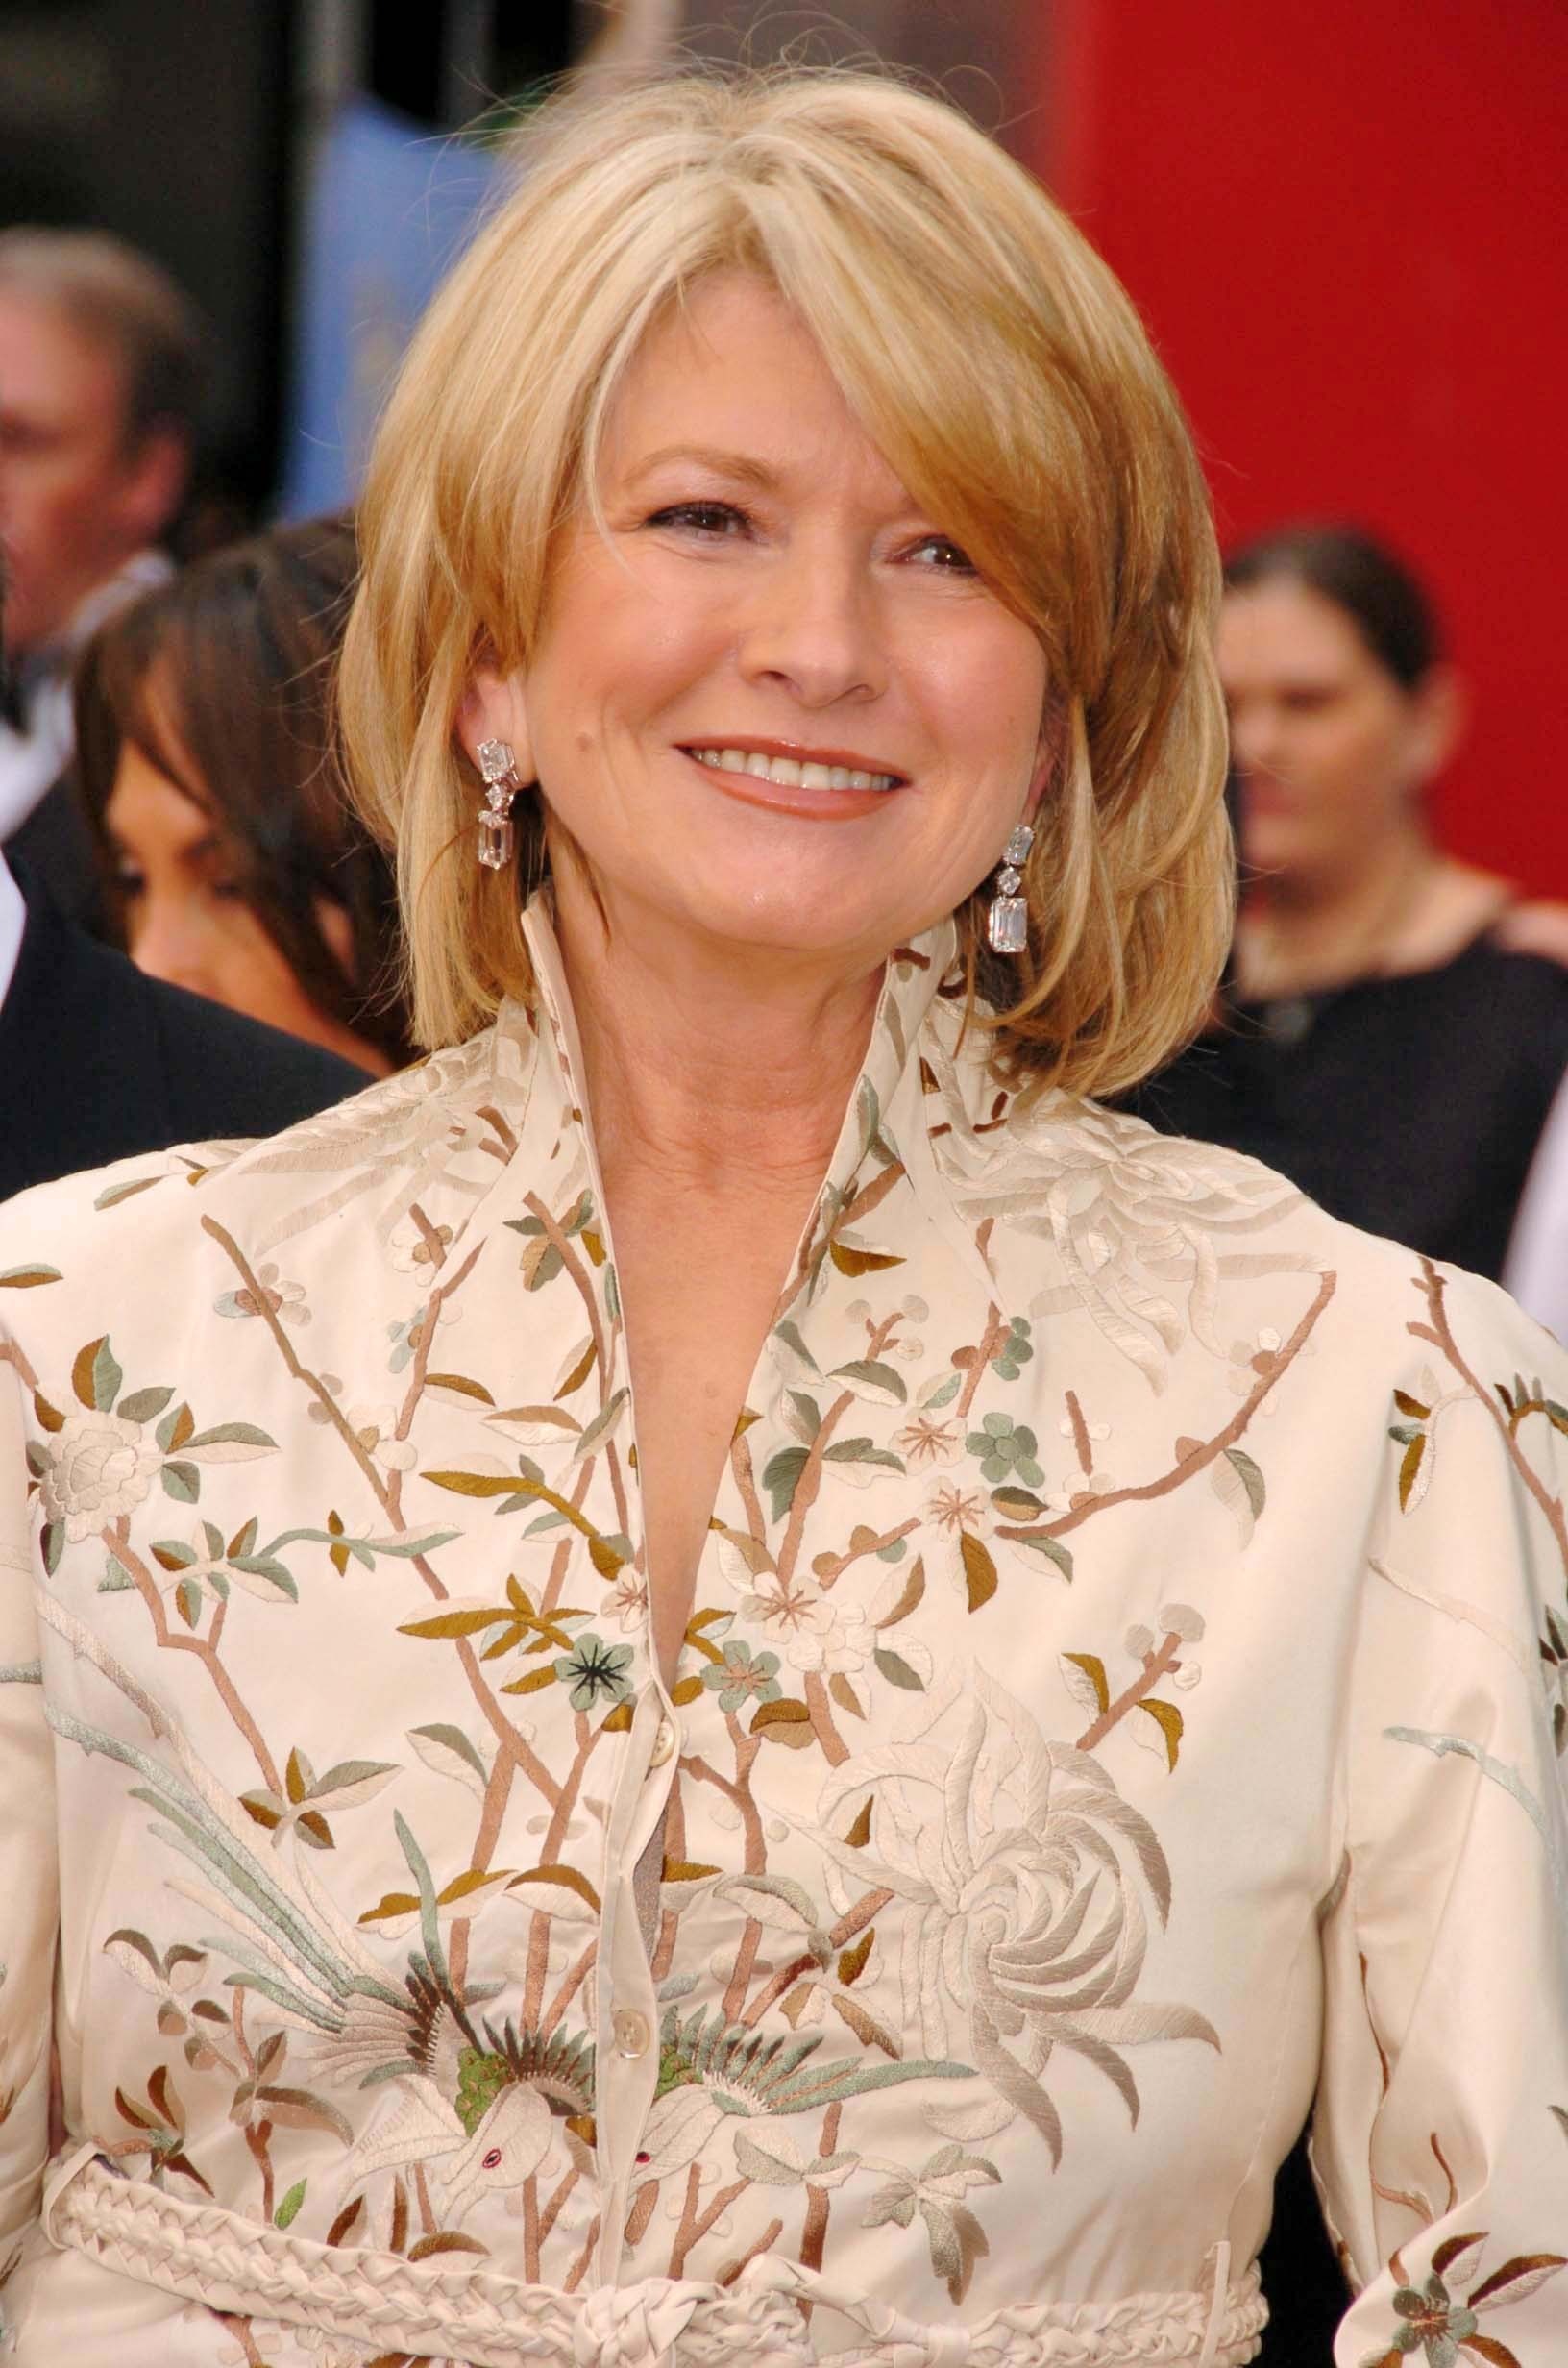 Martha Stewart is ranked number 6 among the most popular leo celebrities